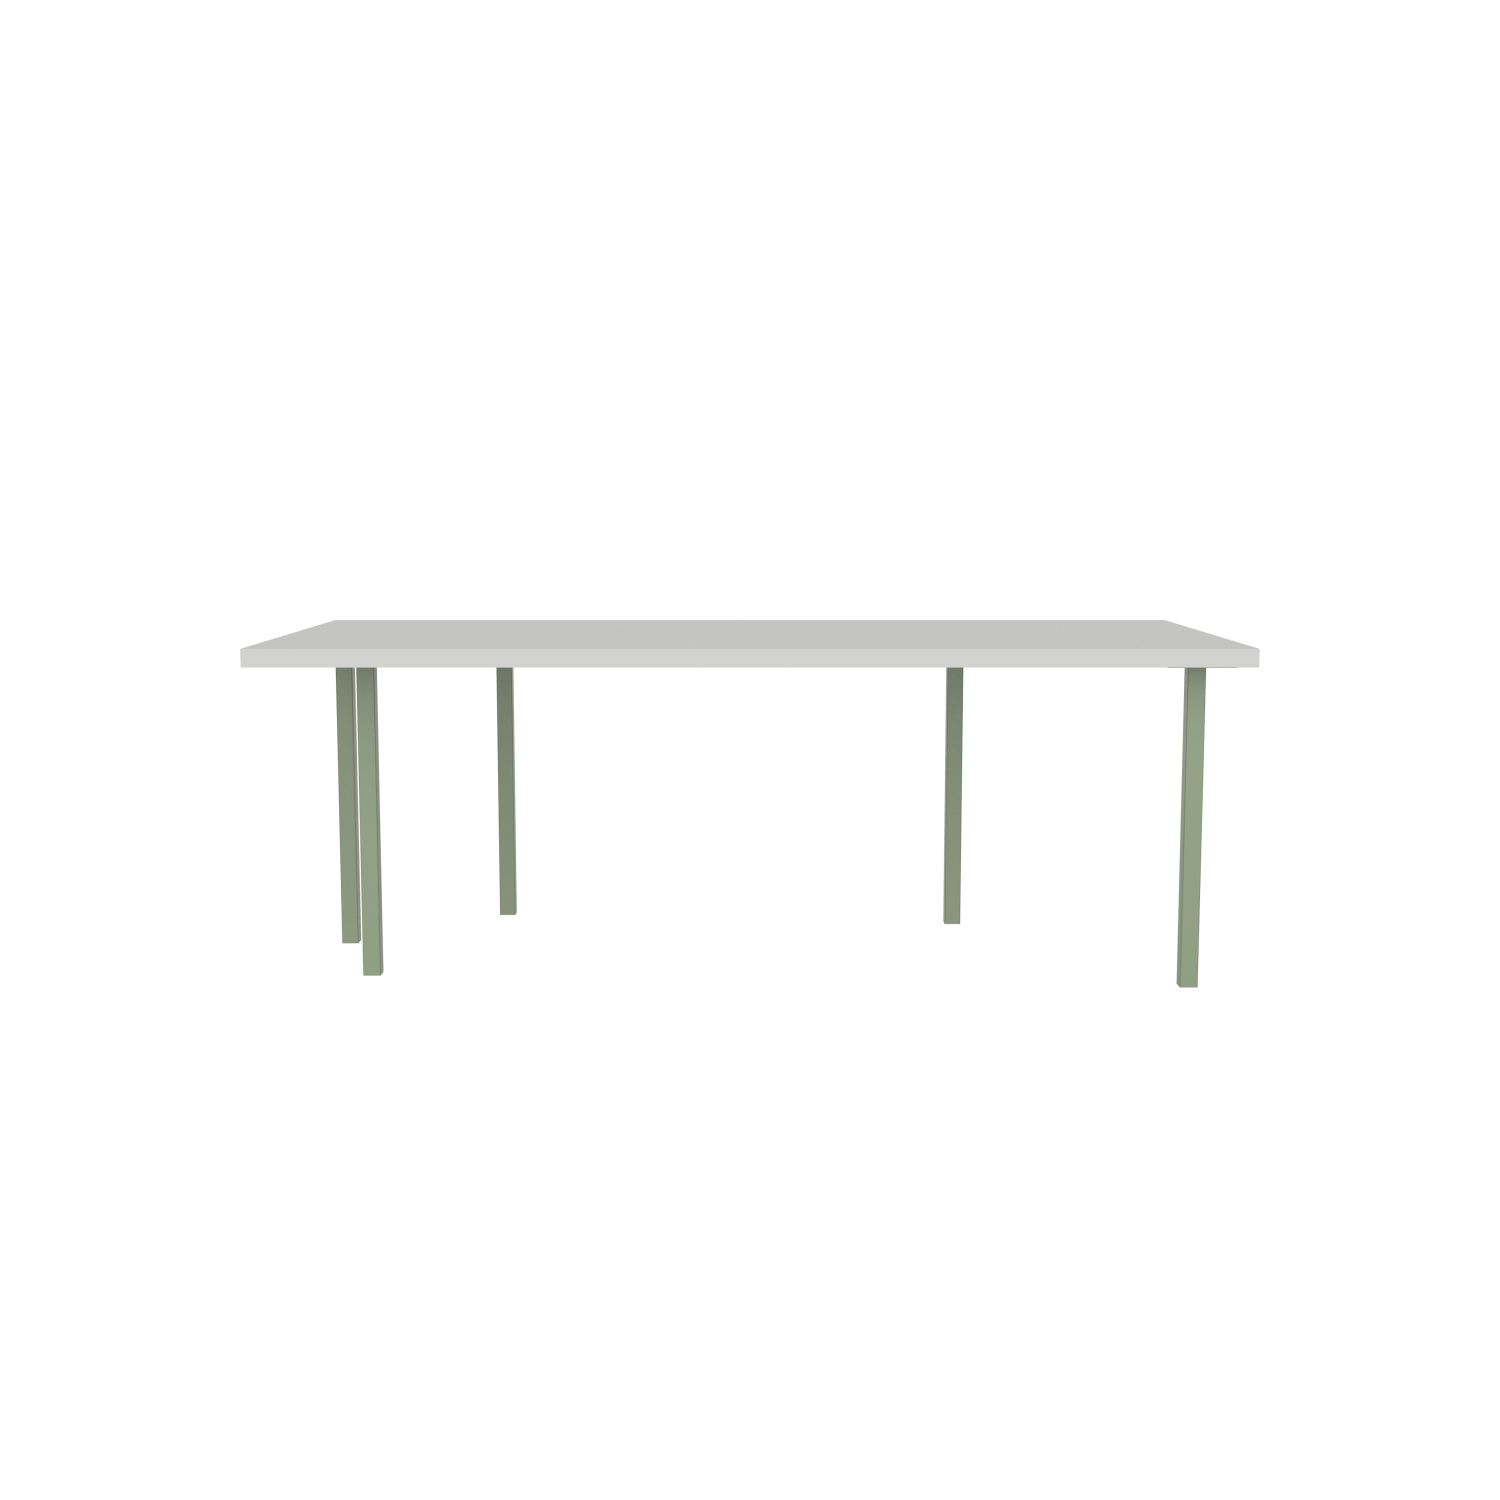 lensvelt bbrand table five fixed heigt 103x218 hpl boring grey 50 mm price level 1 green ral6021